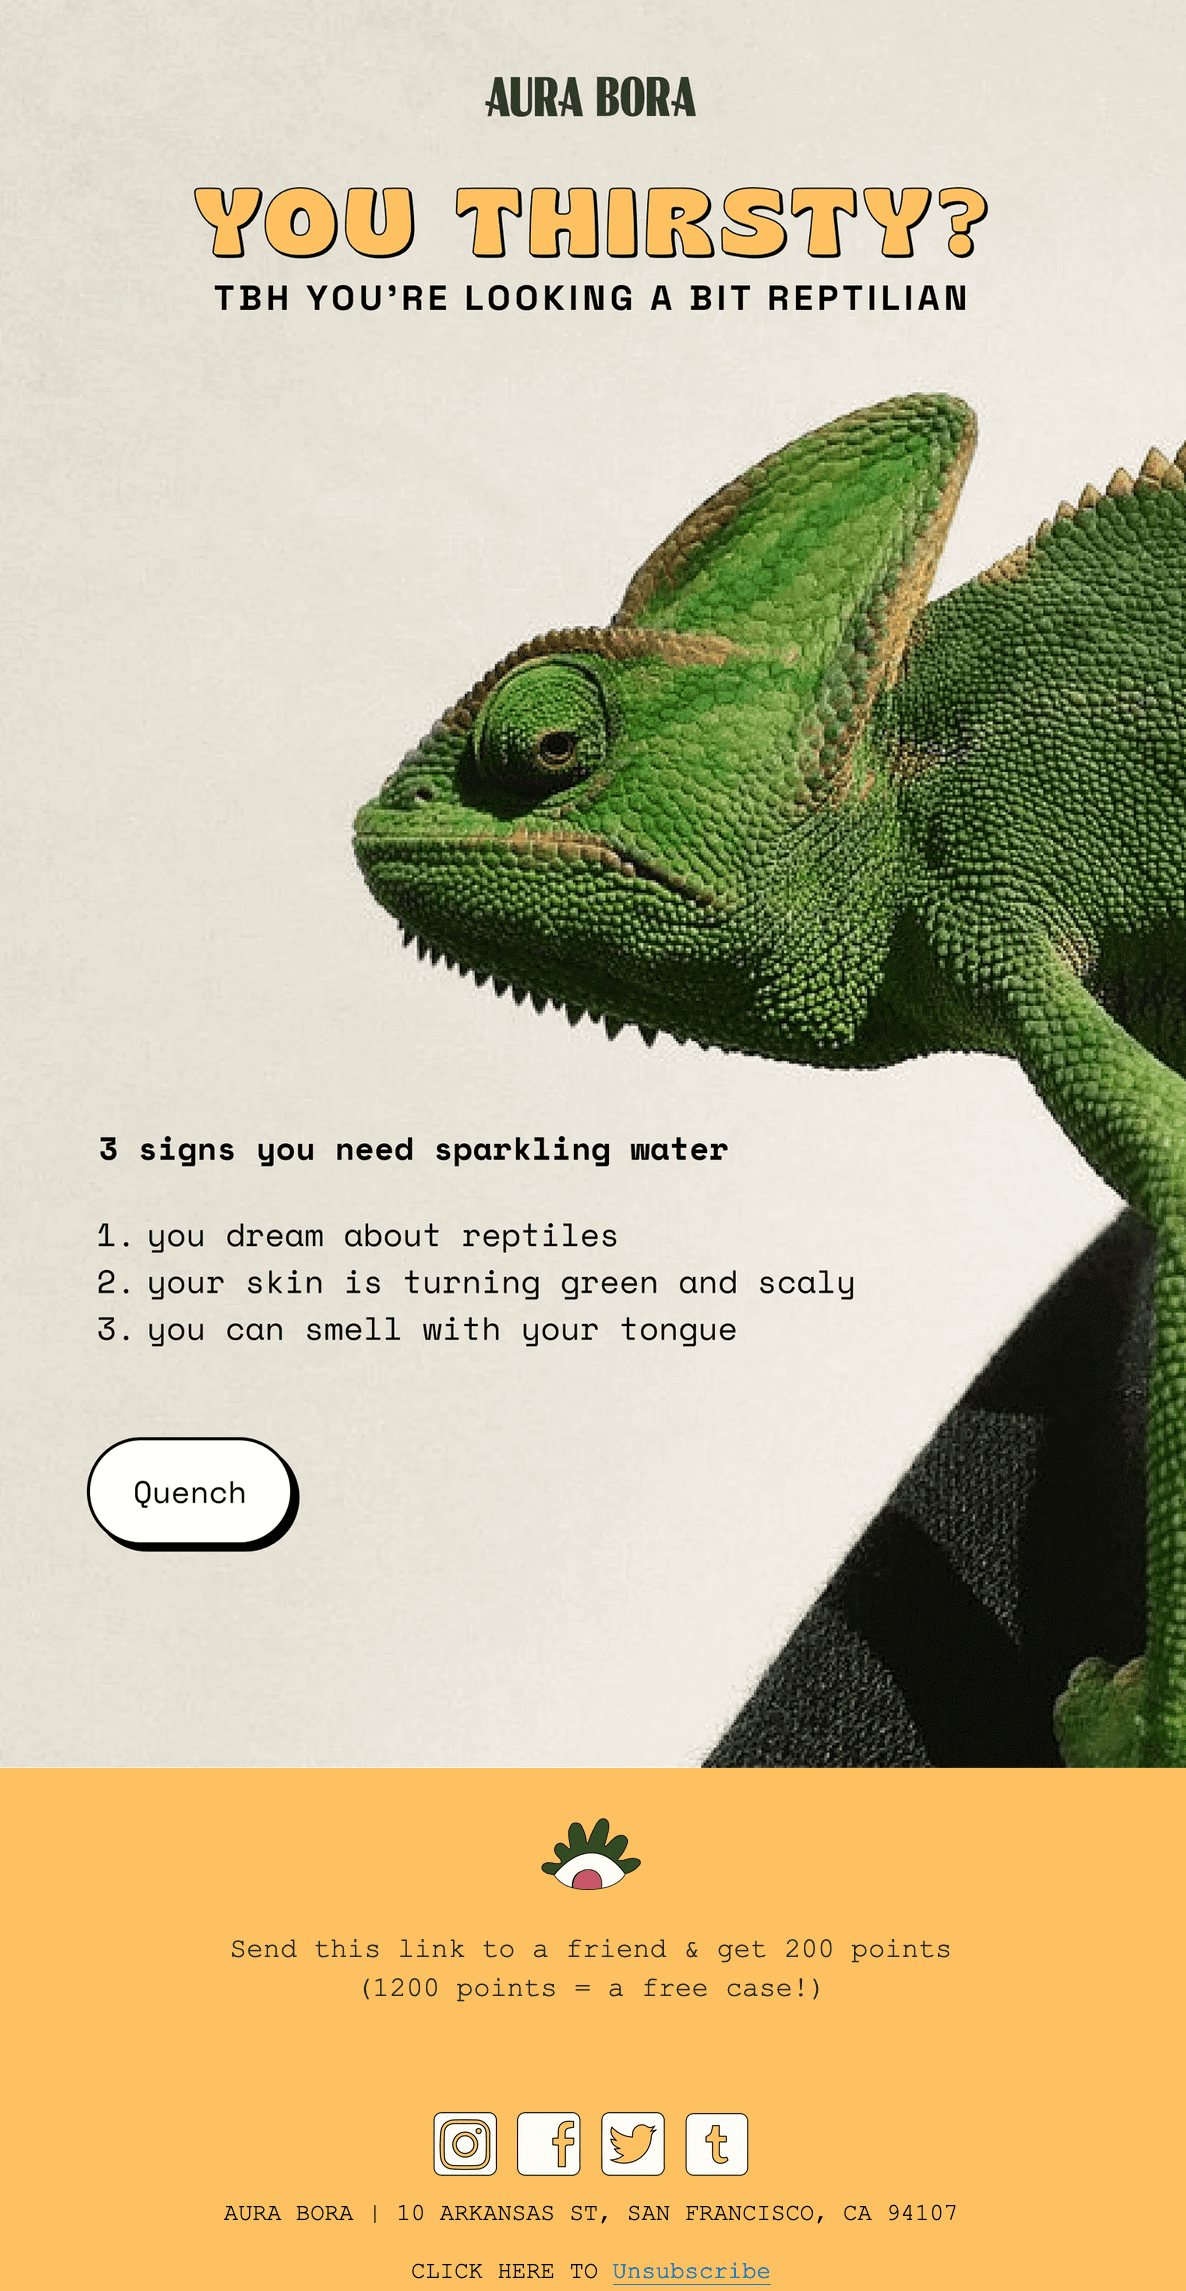 An email with a big photo of a chameleon and 3 signs that the reader needs sparkling water